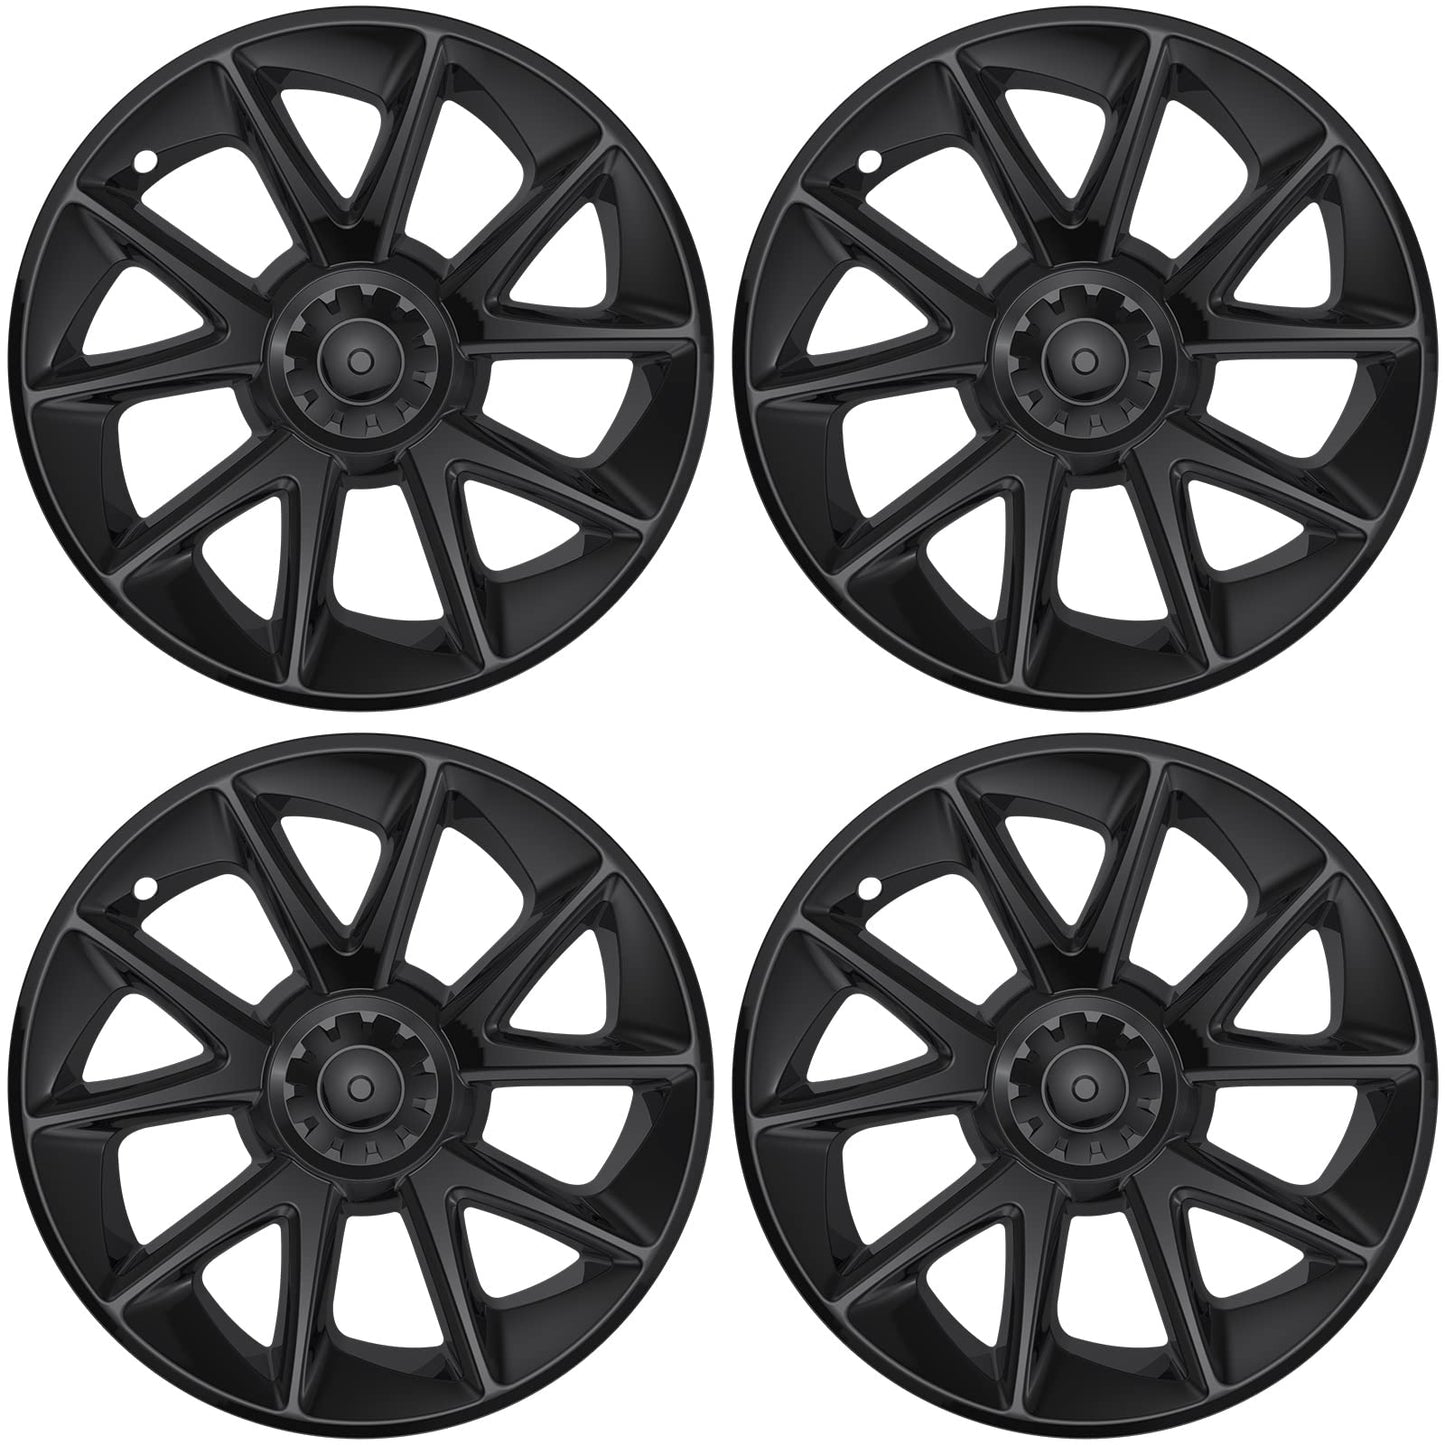 Evtesparts Model 3 18" Areo Wheel Cover Blade Style Hubcaps